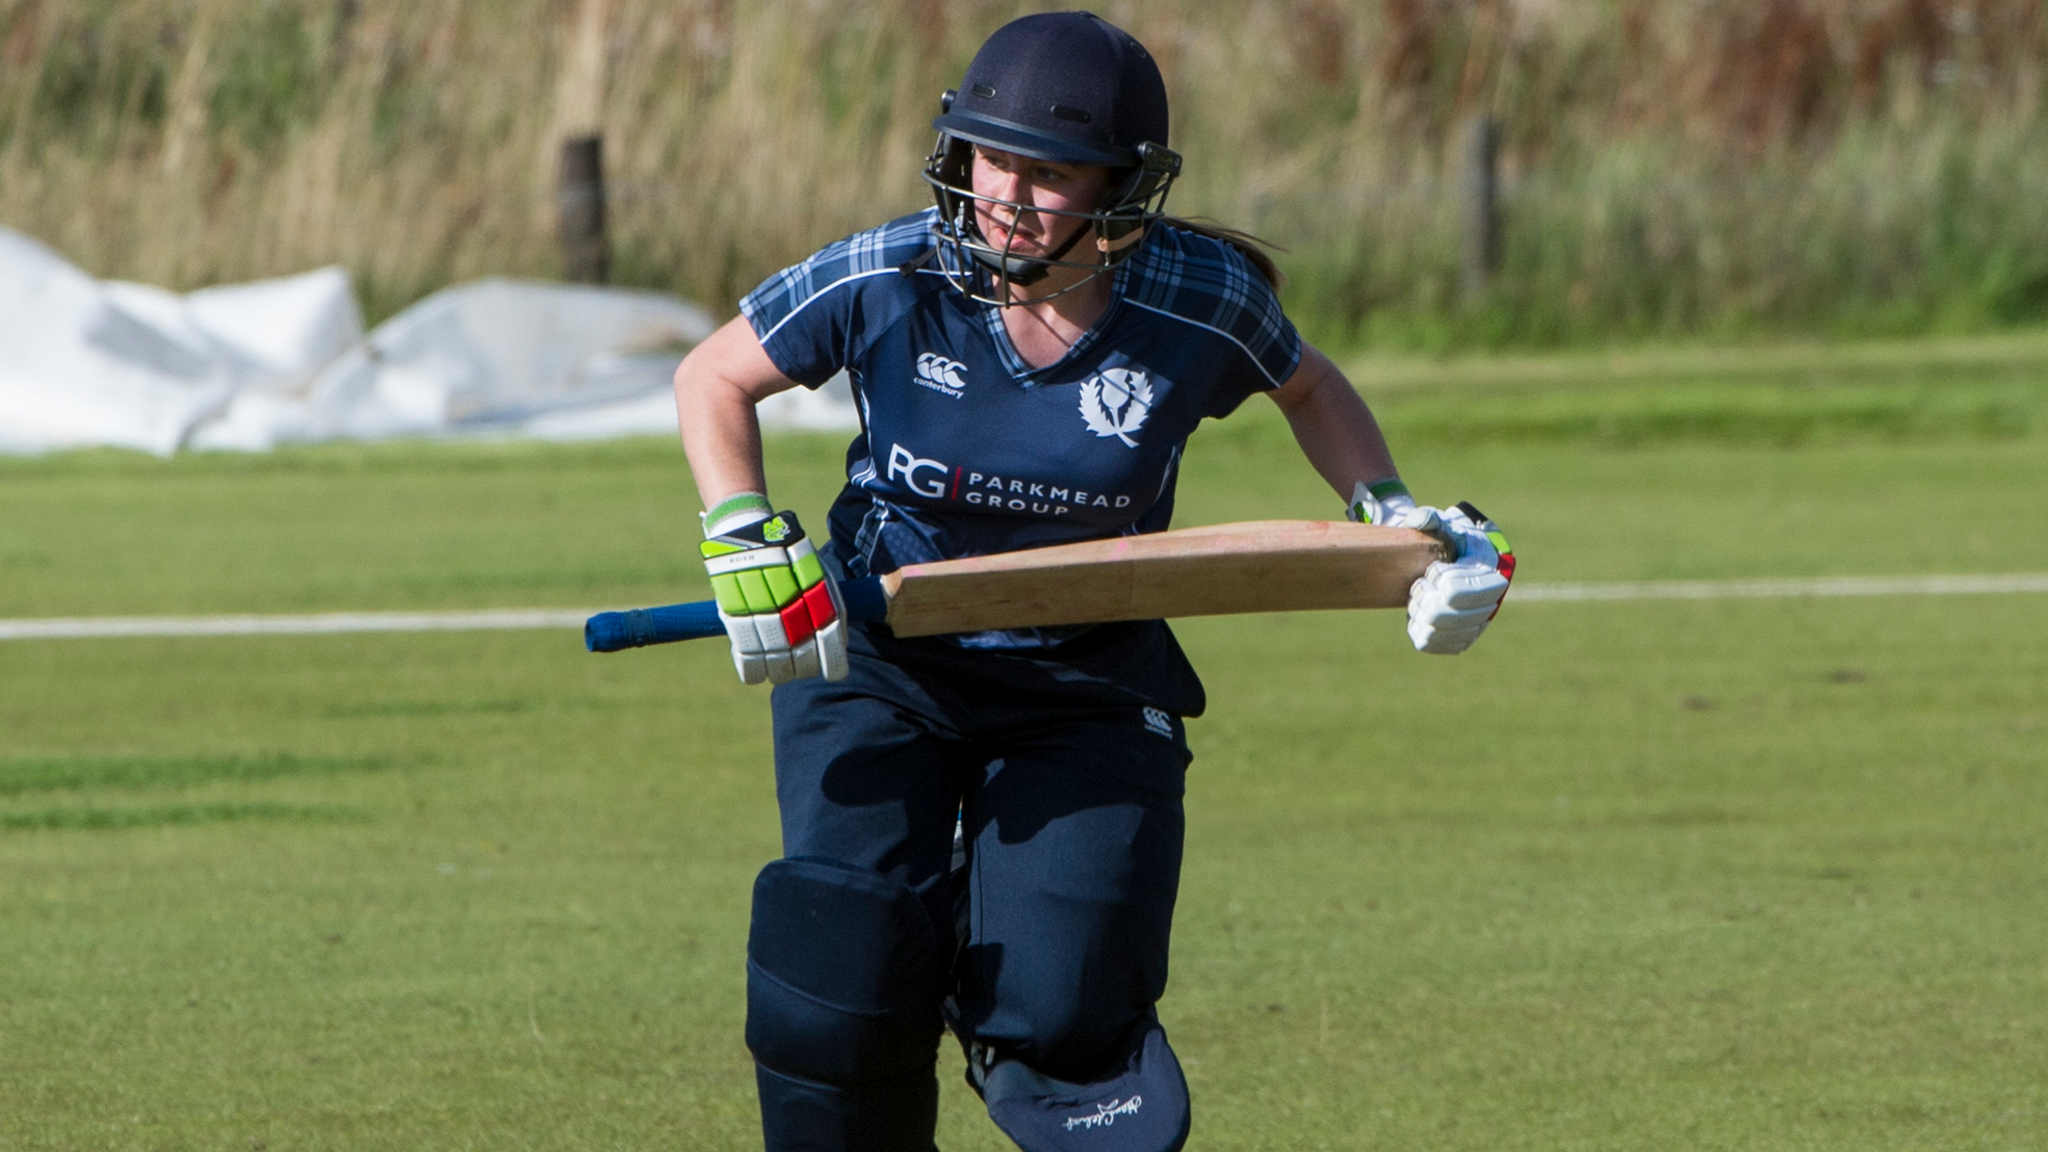 Wildcats A Head to Staffordshire and Derbyshire for First Fixtures of 2019